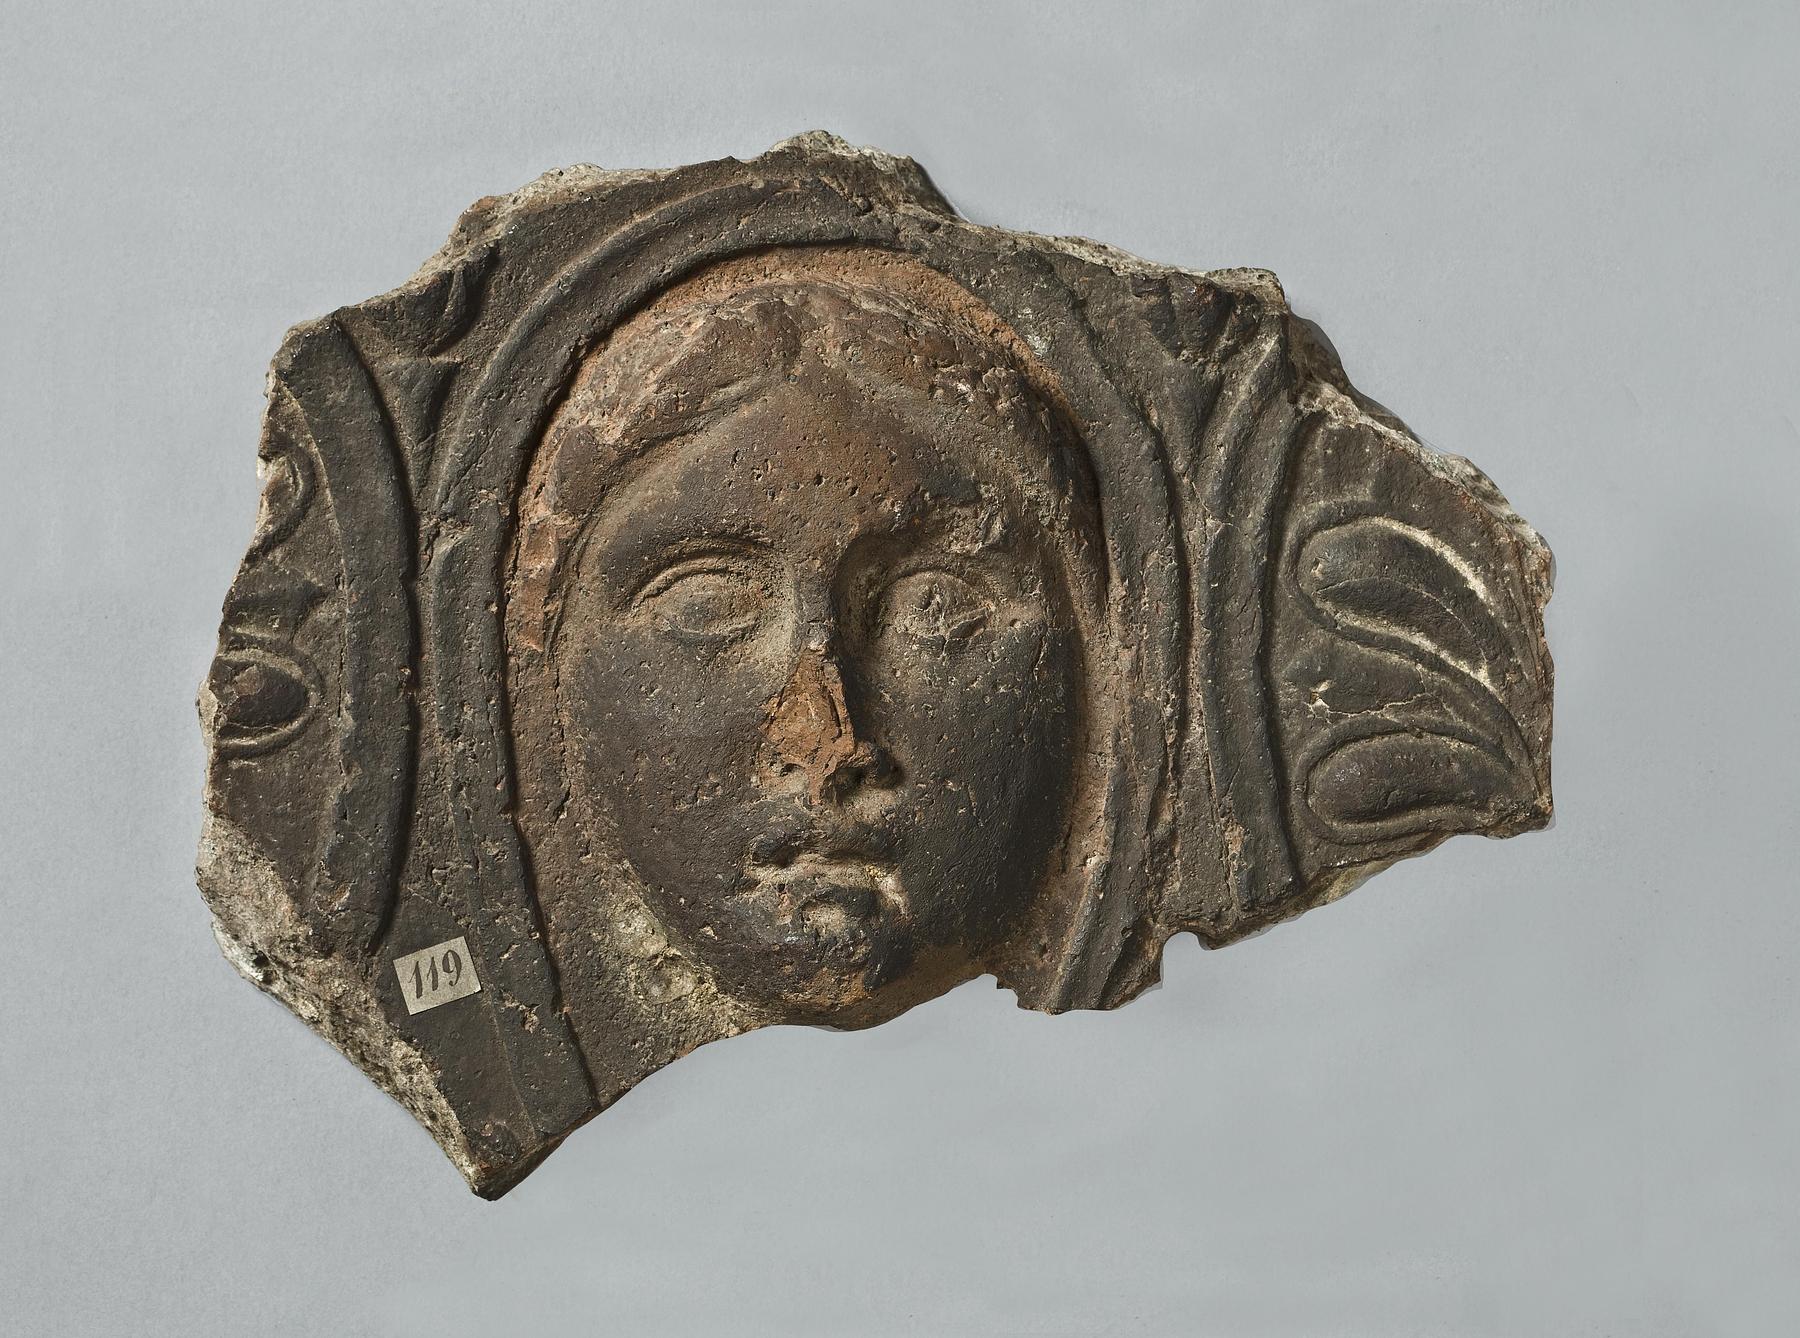 Architectural relief with female mask, H1119